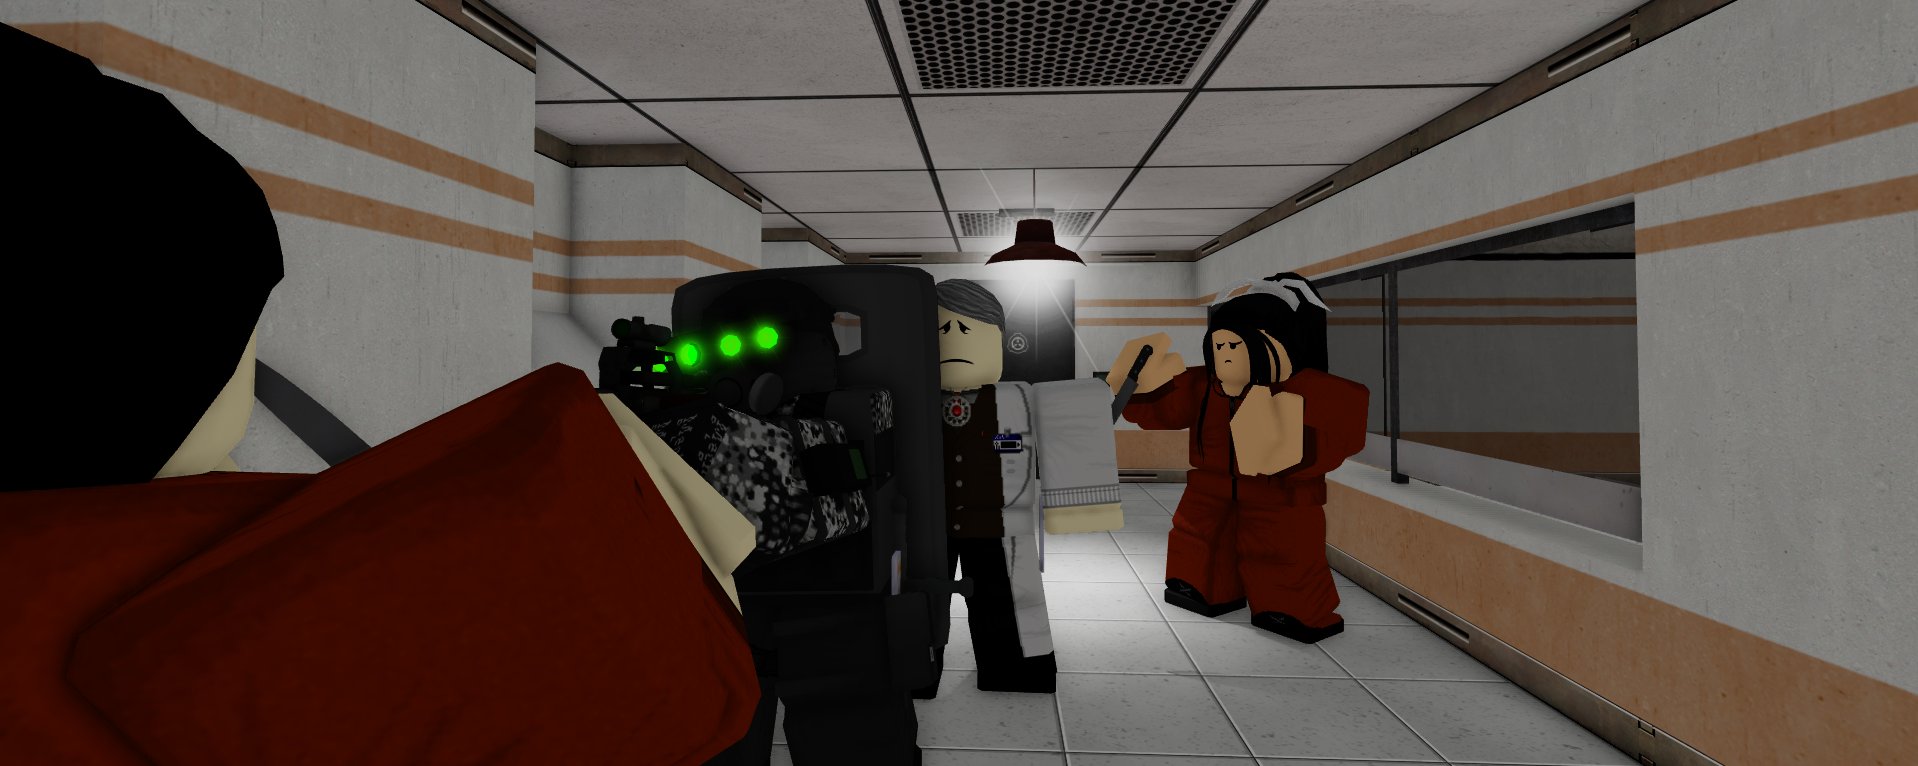 Scp Site Roleplay Roblox GIF